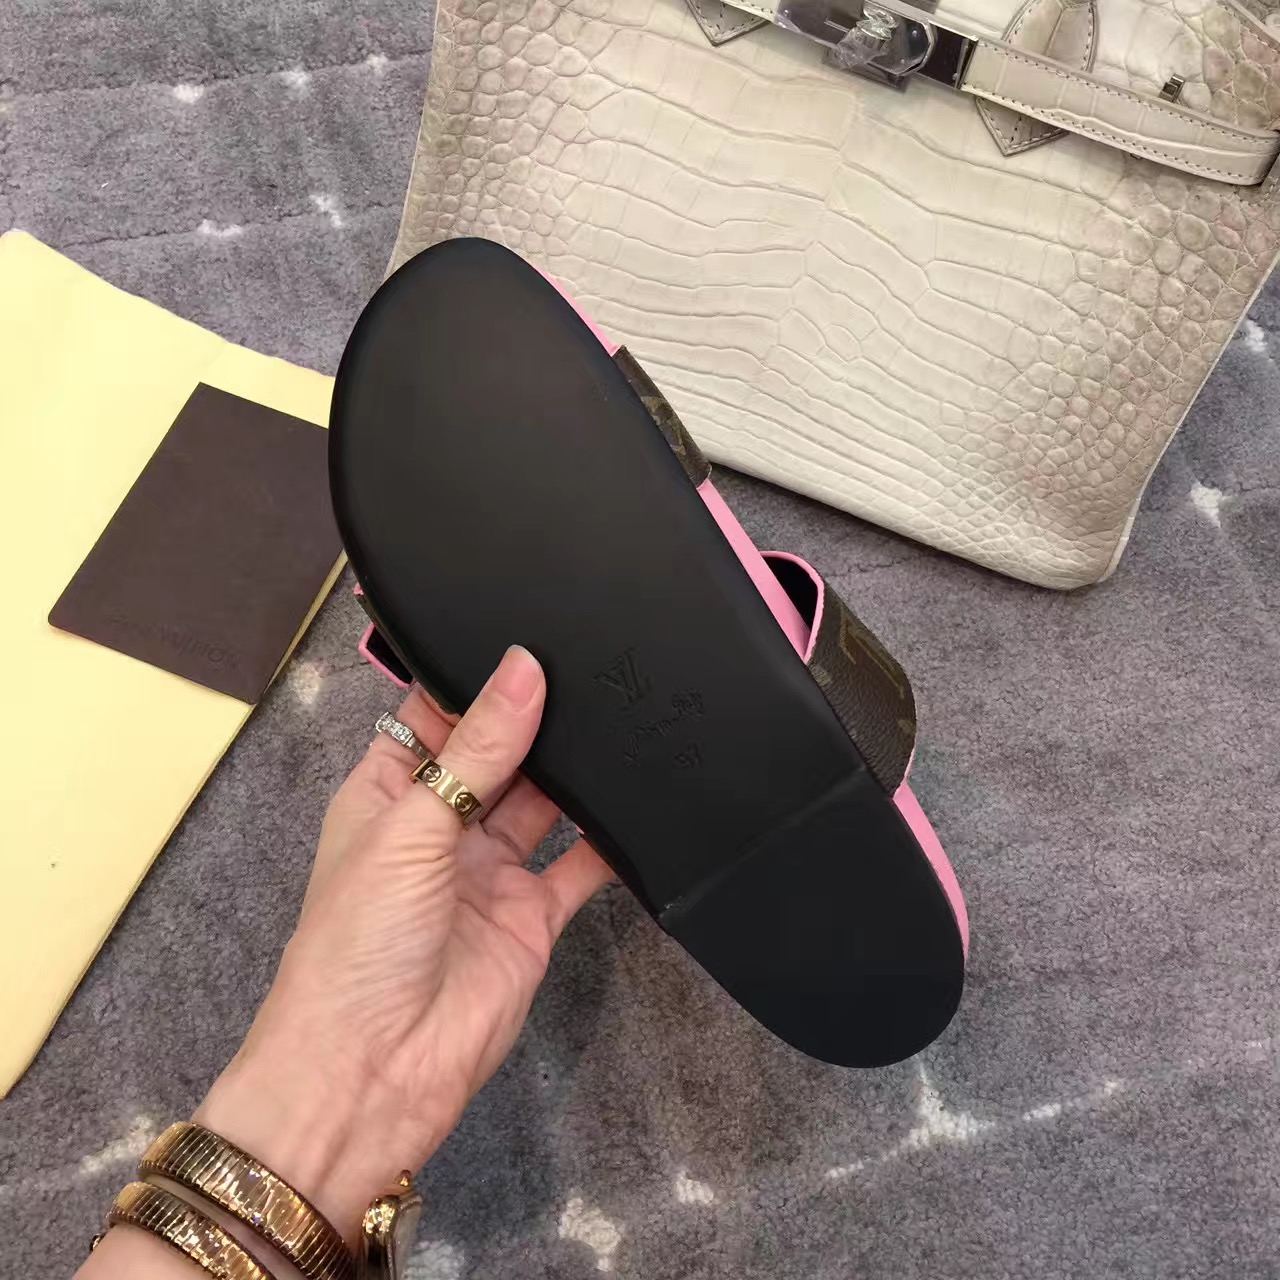 Louis Vuitton Bom Dia Flats: Are they fat feet friendly? Review 